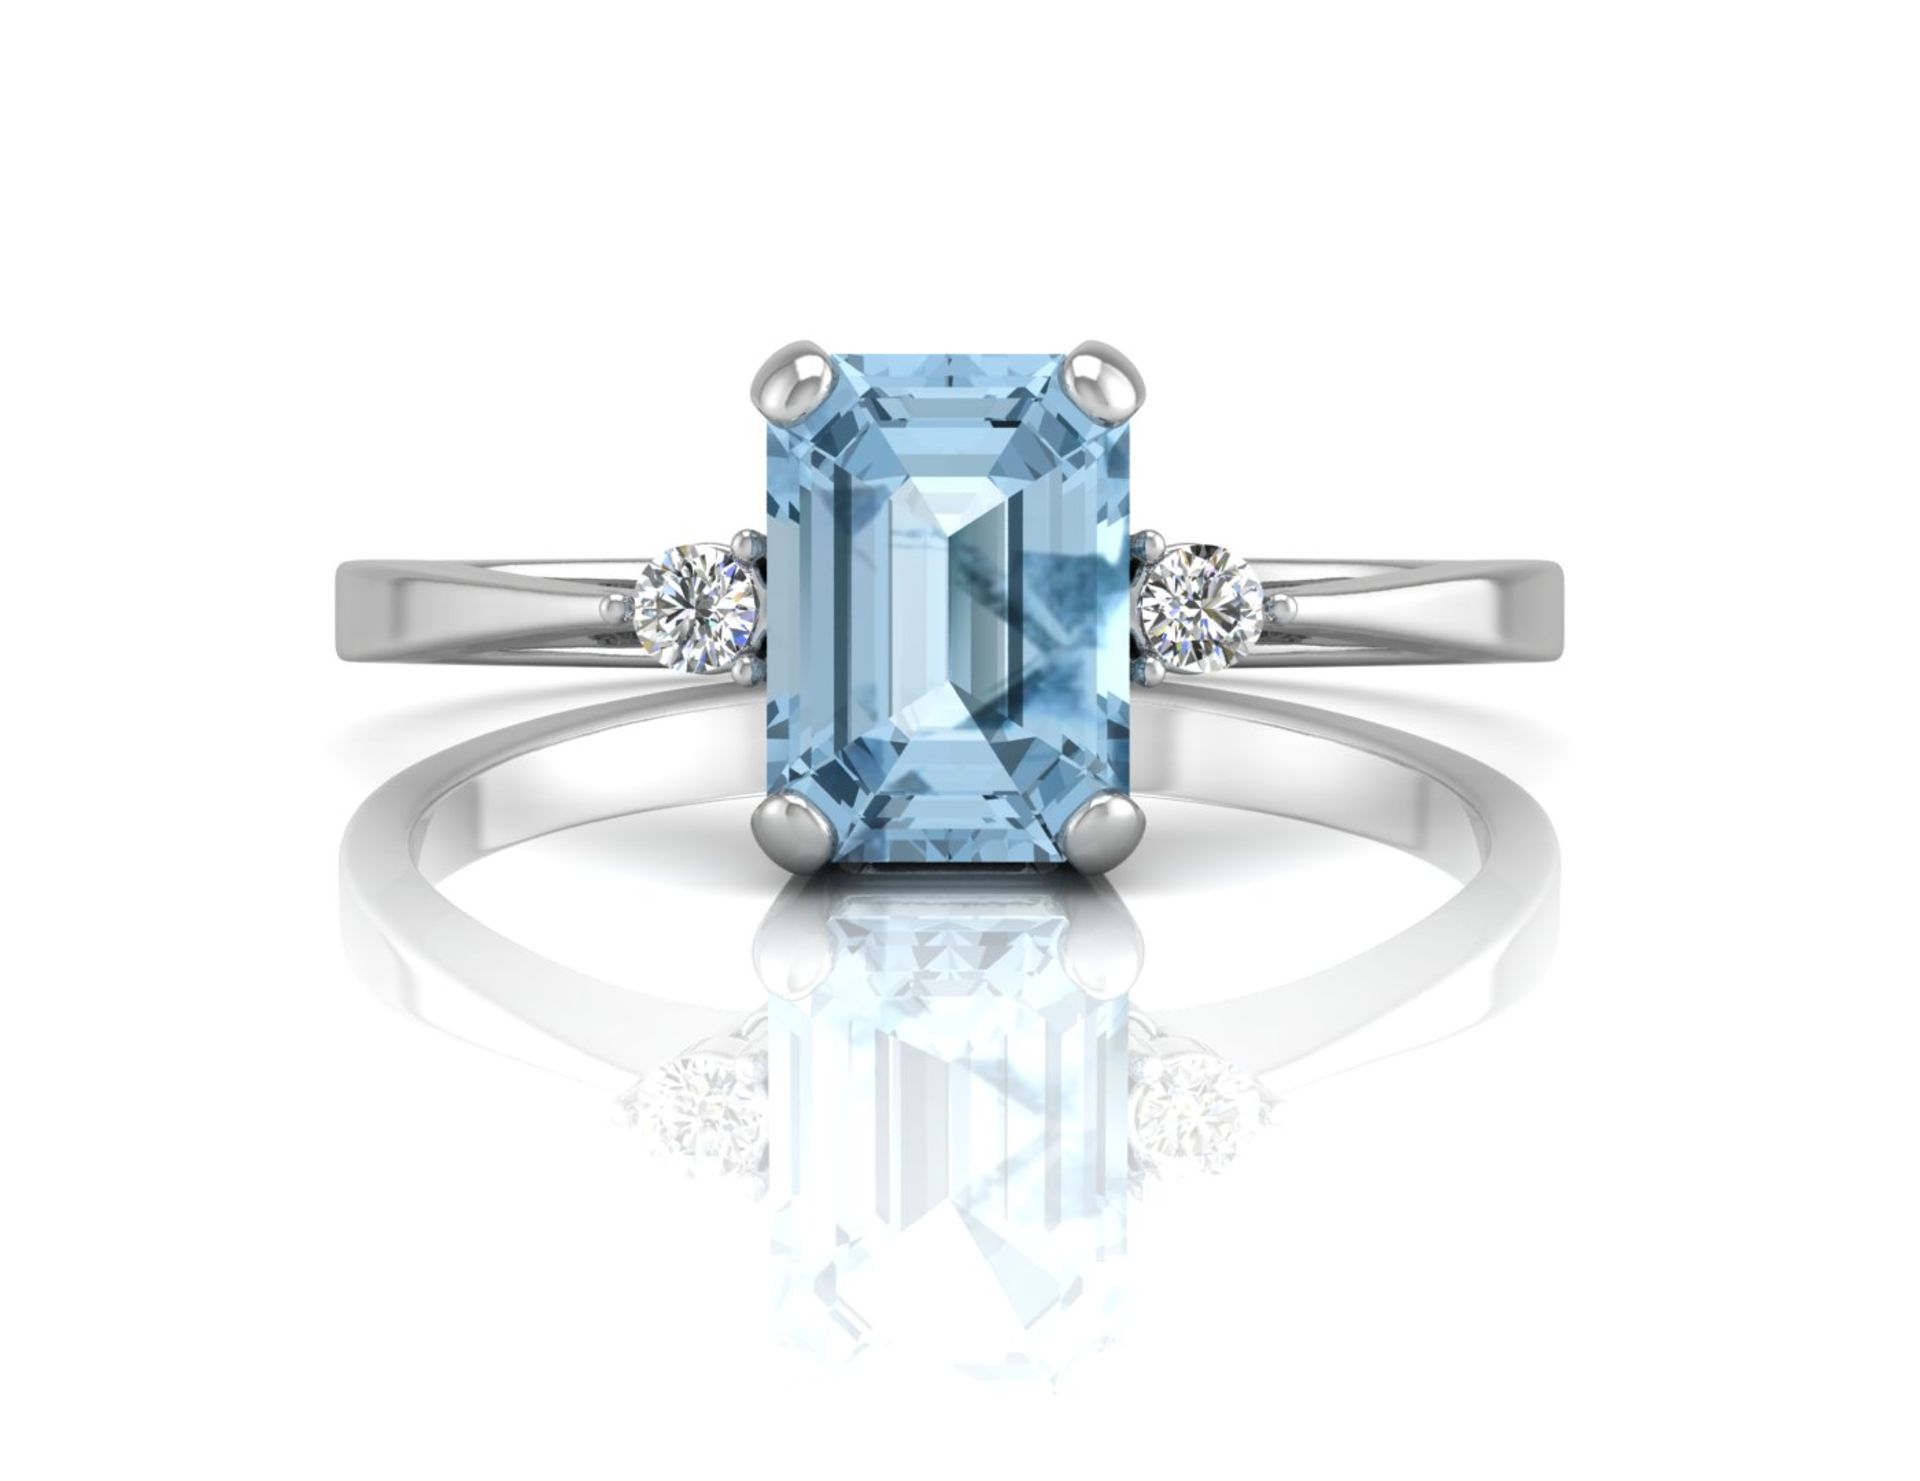 9ct White Gold Diamond And Emerald Cut Blue Topaz Ring (BT1.21) 0.04 Carats - Valued By GIE £1,495. - Image 4 of 5